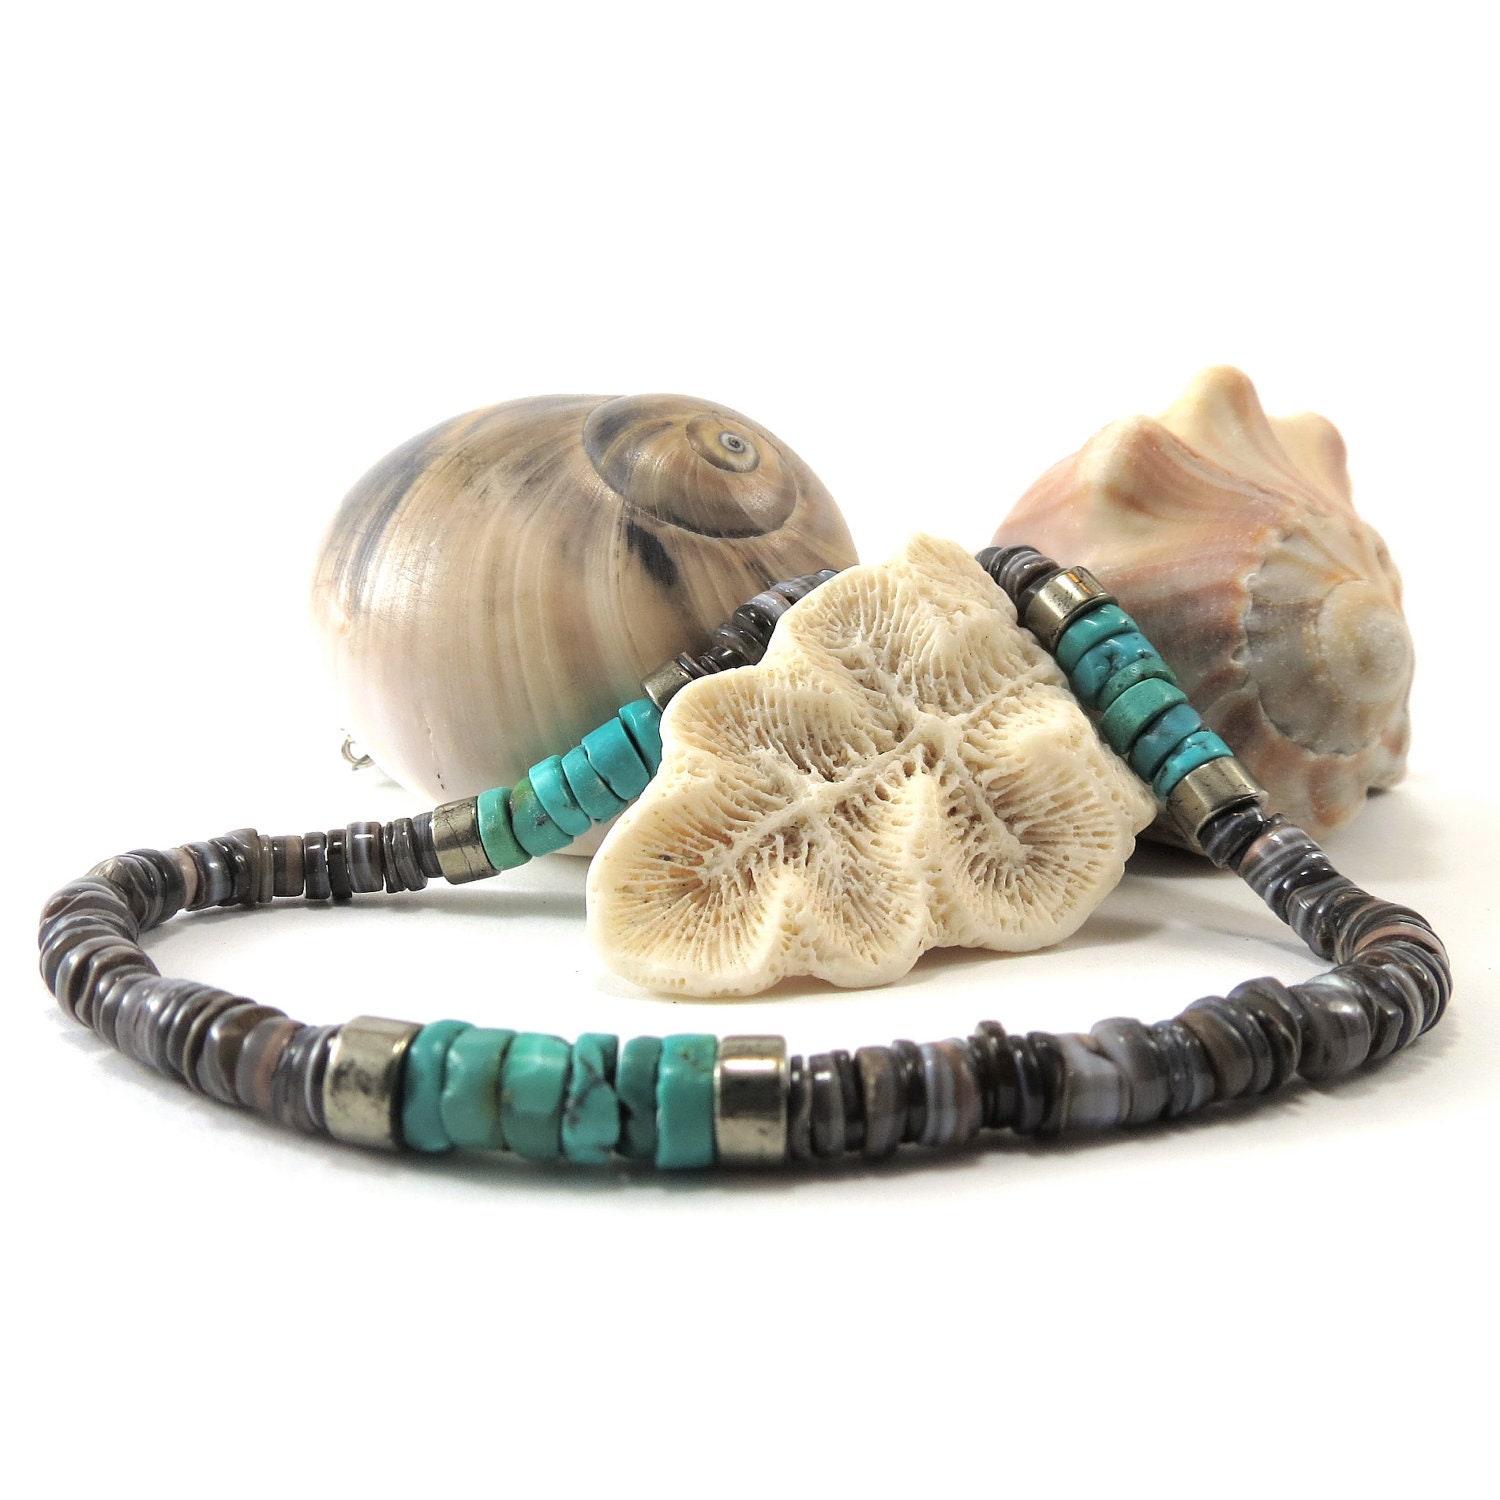 Men's Beaded Necklace of Turquoise, Shell and Pyrite - jagrocks